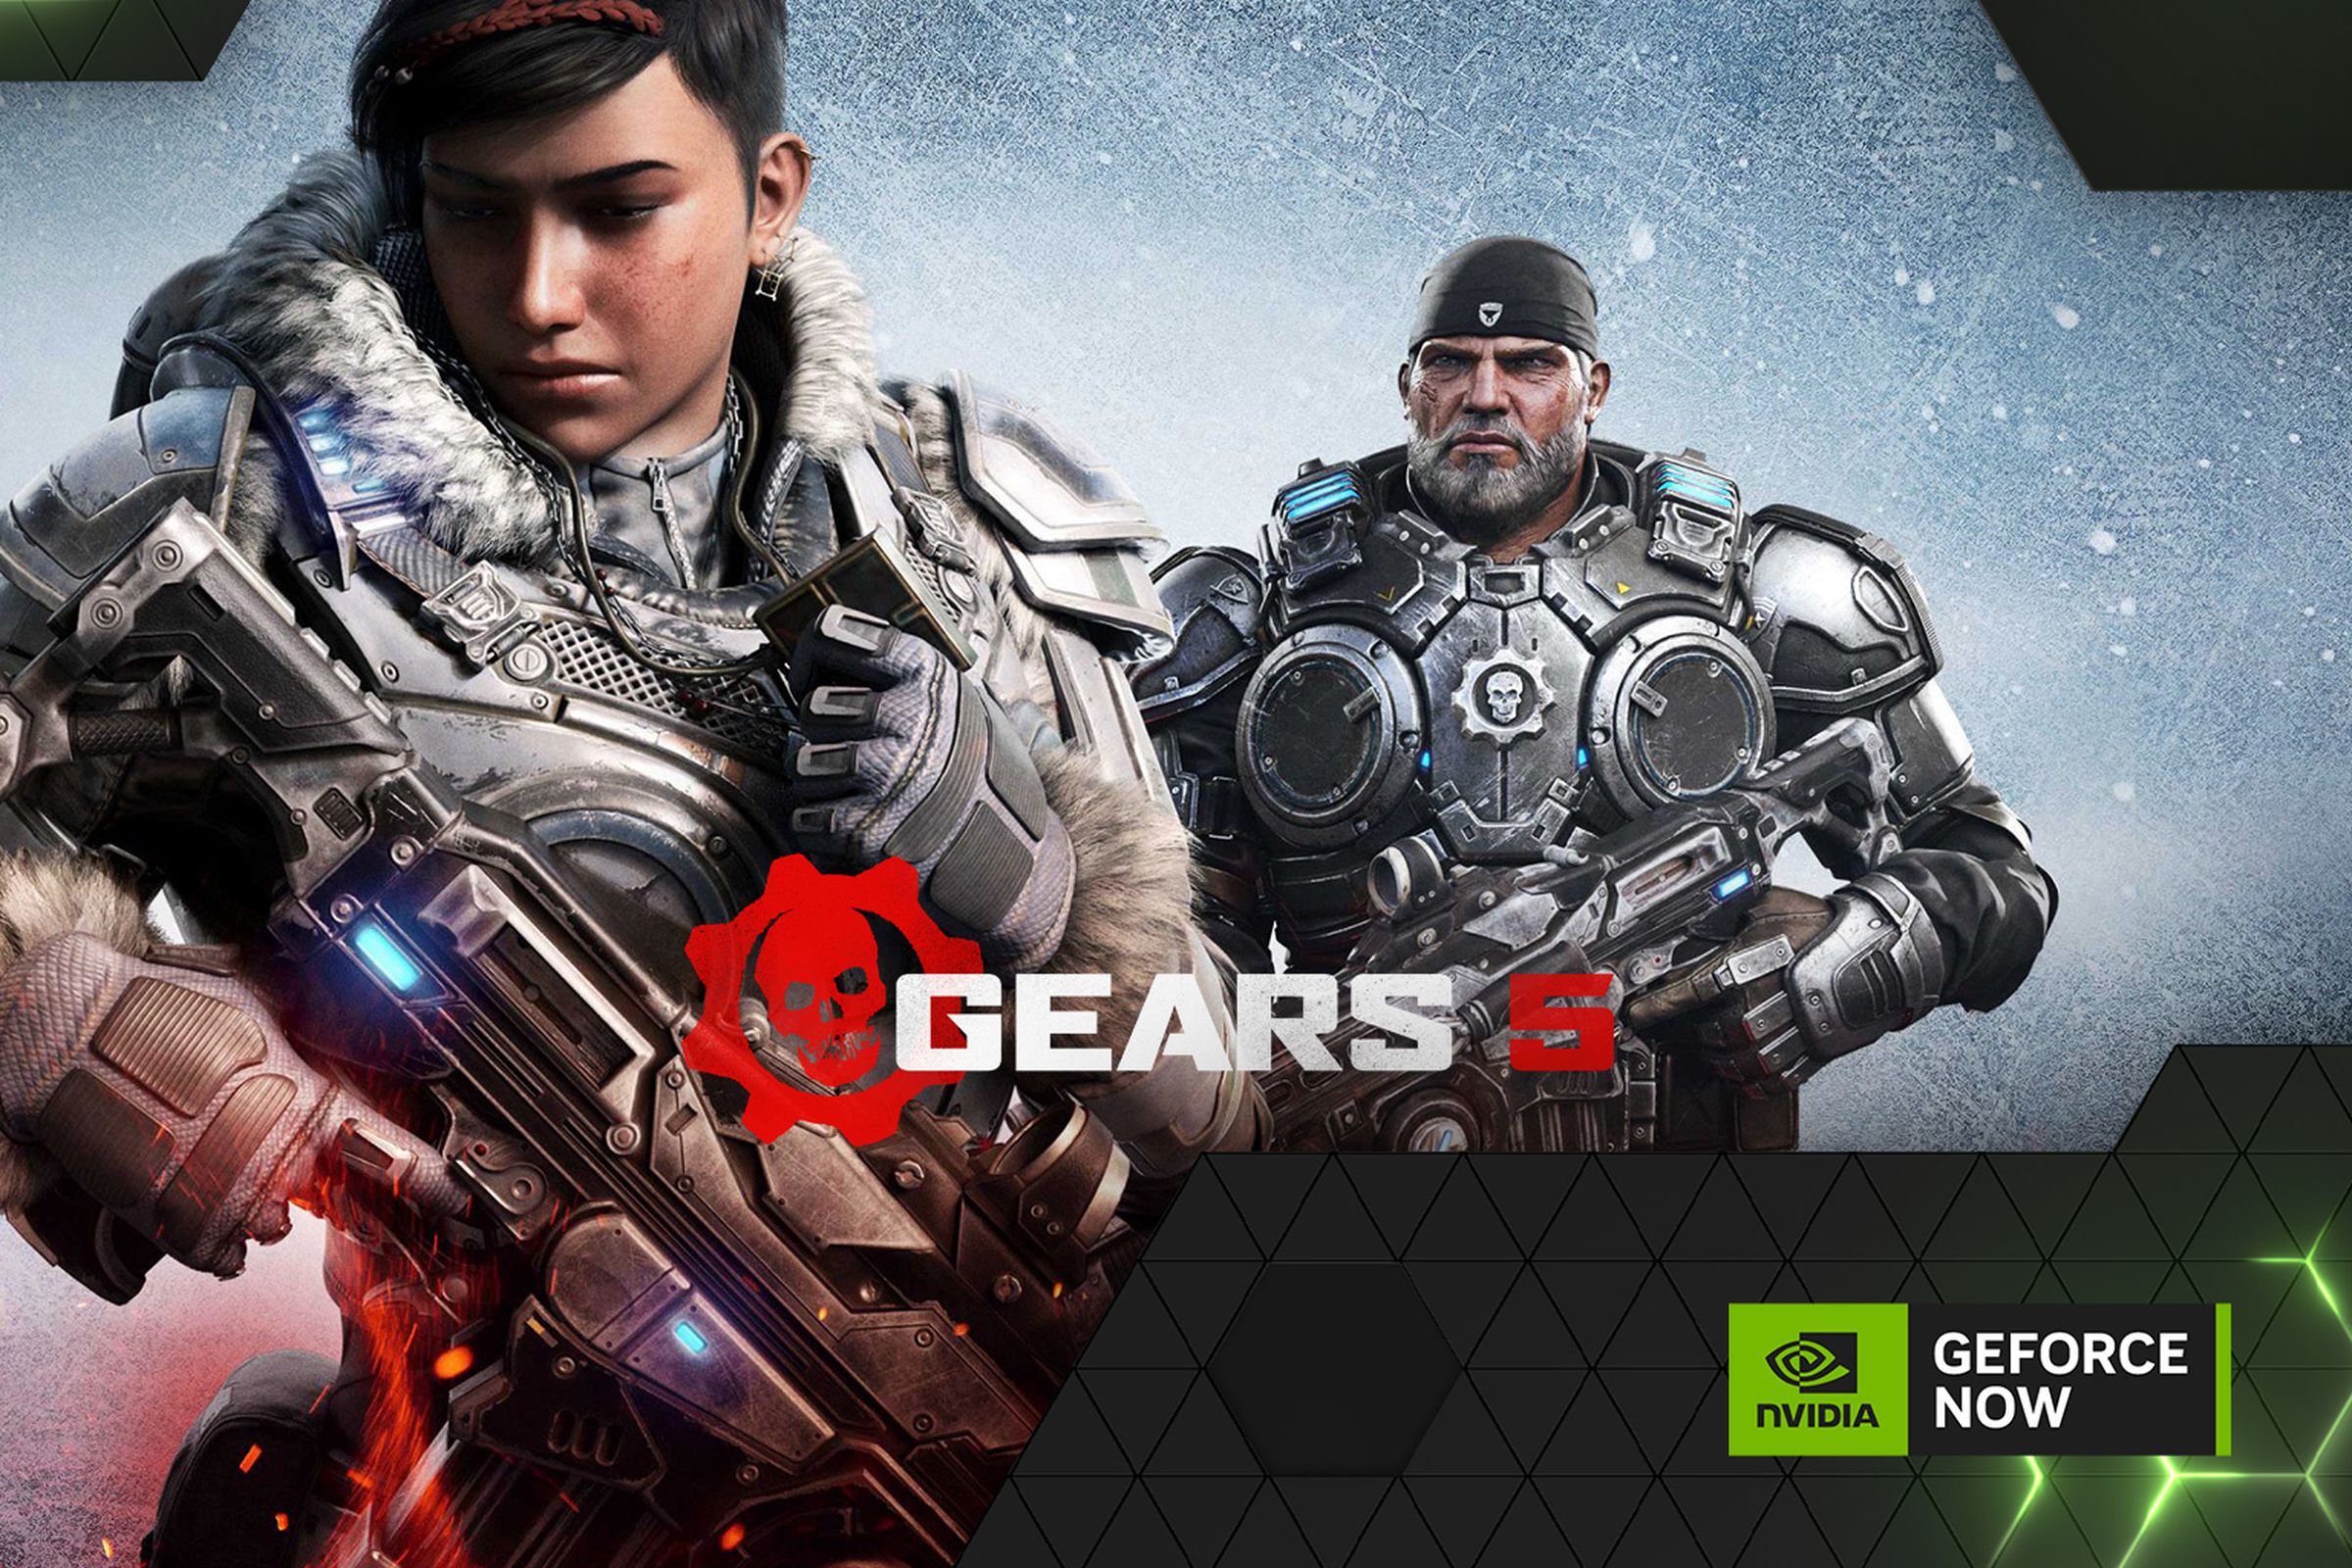 Illustration of Gears 5 and the GeForce Now logo